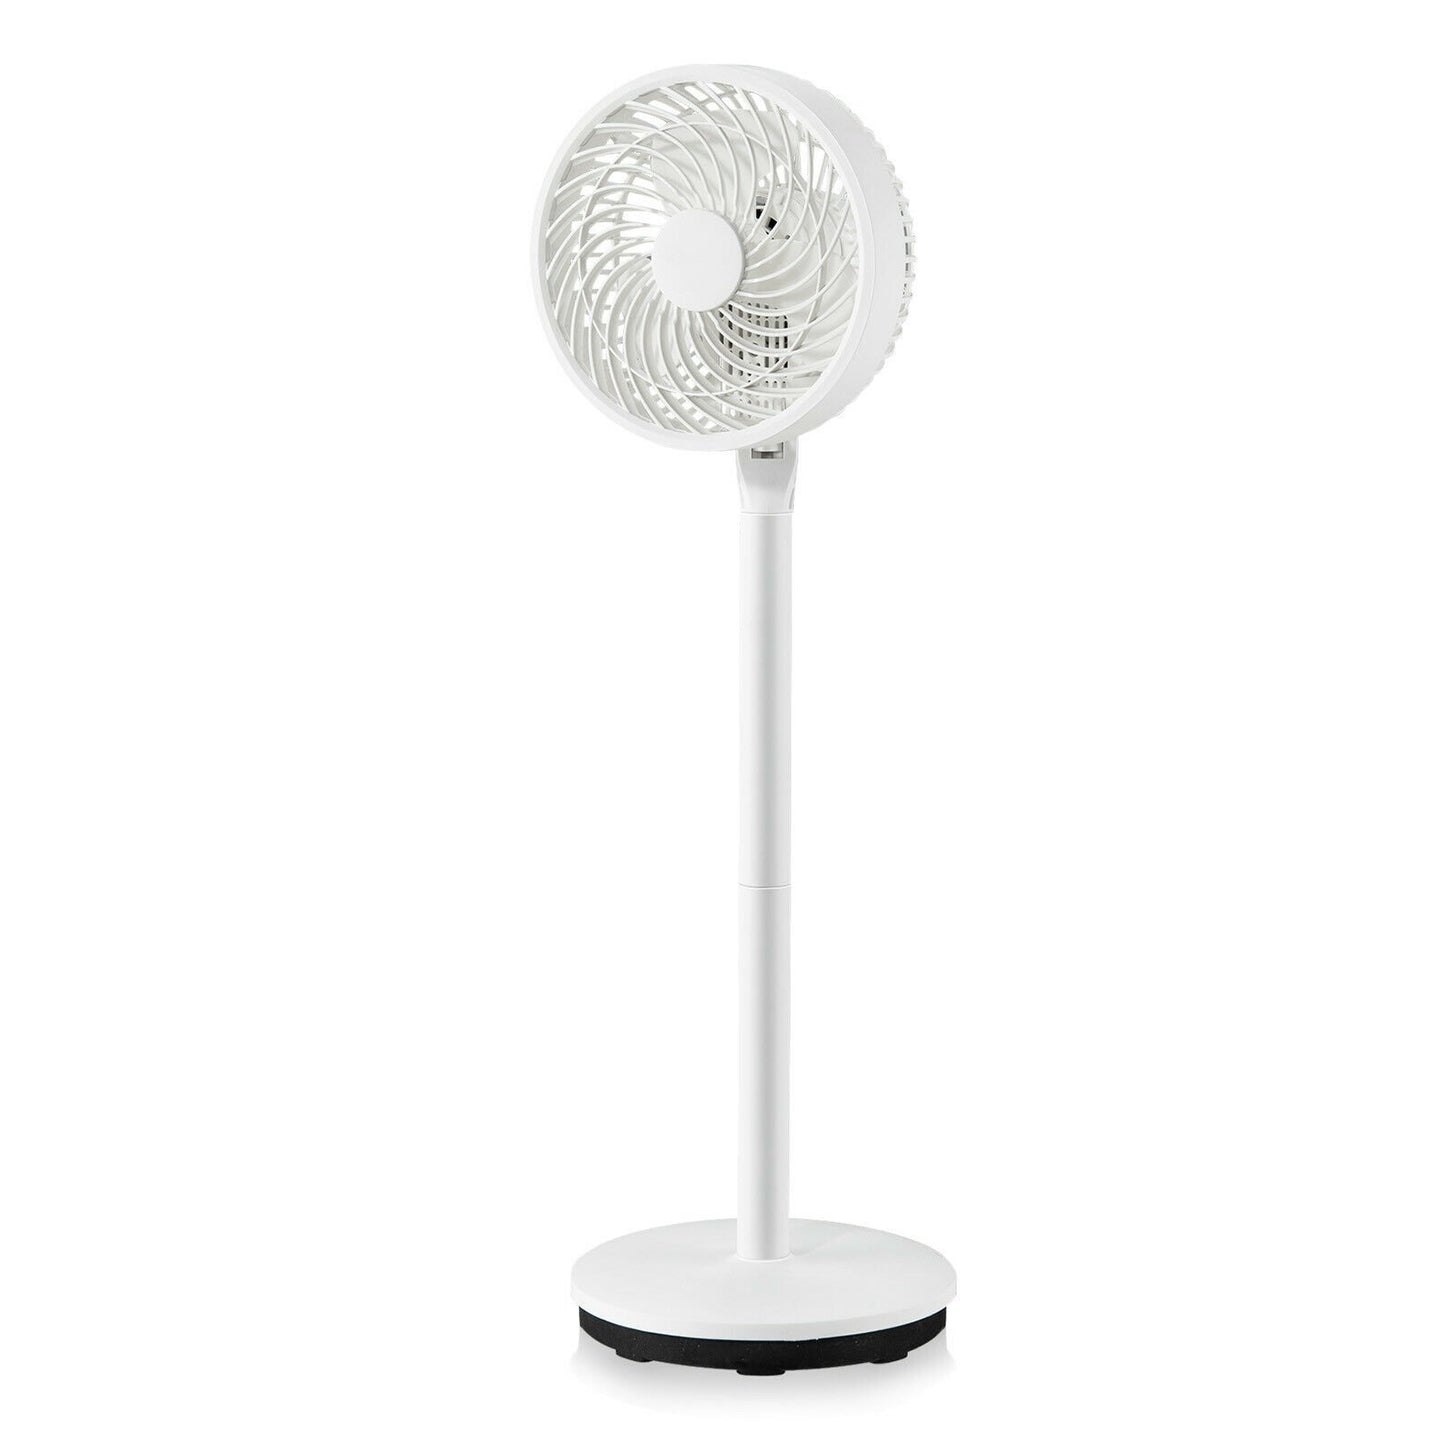 9 Inch Portable Oscillating Pedestal Floor Fan with Adjustable Heights and Speeds, White